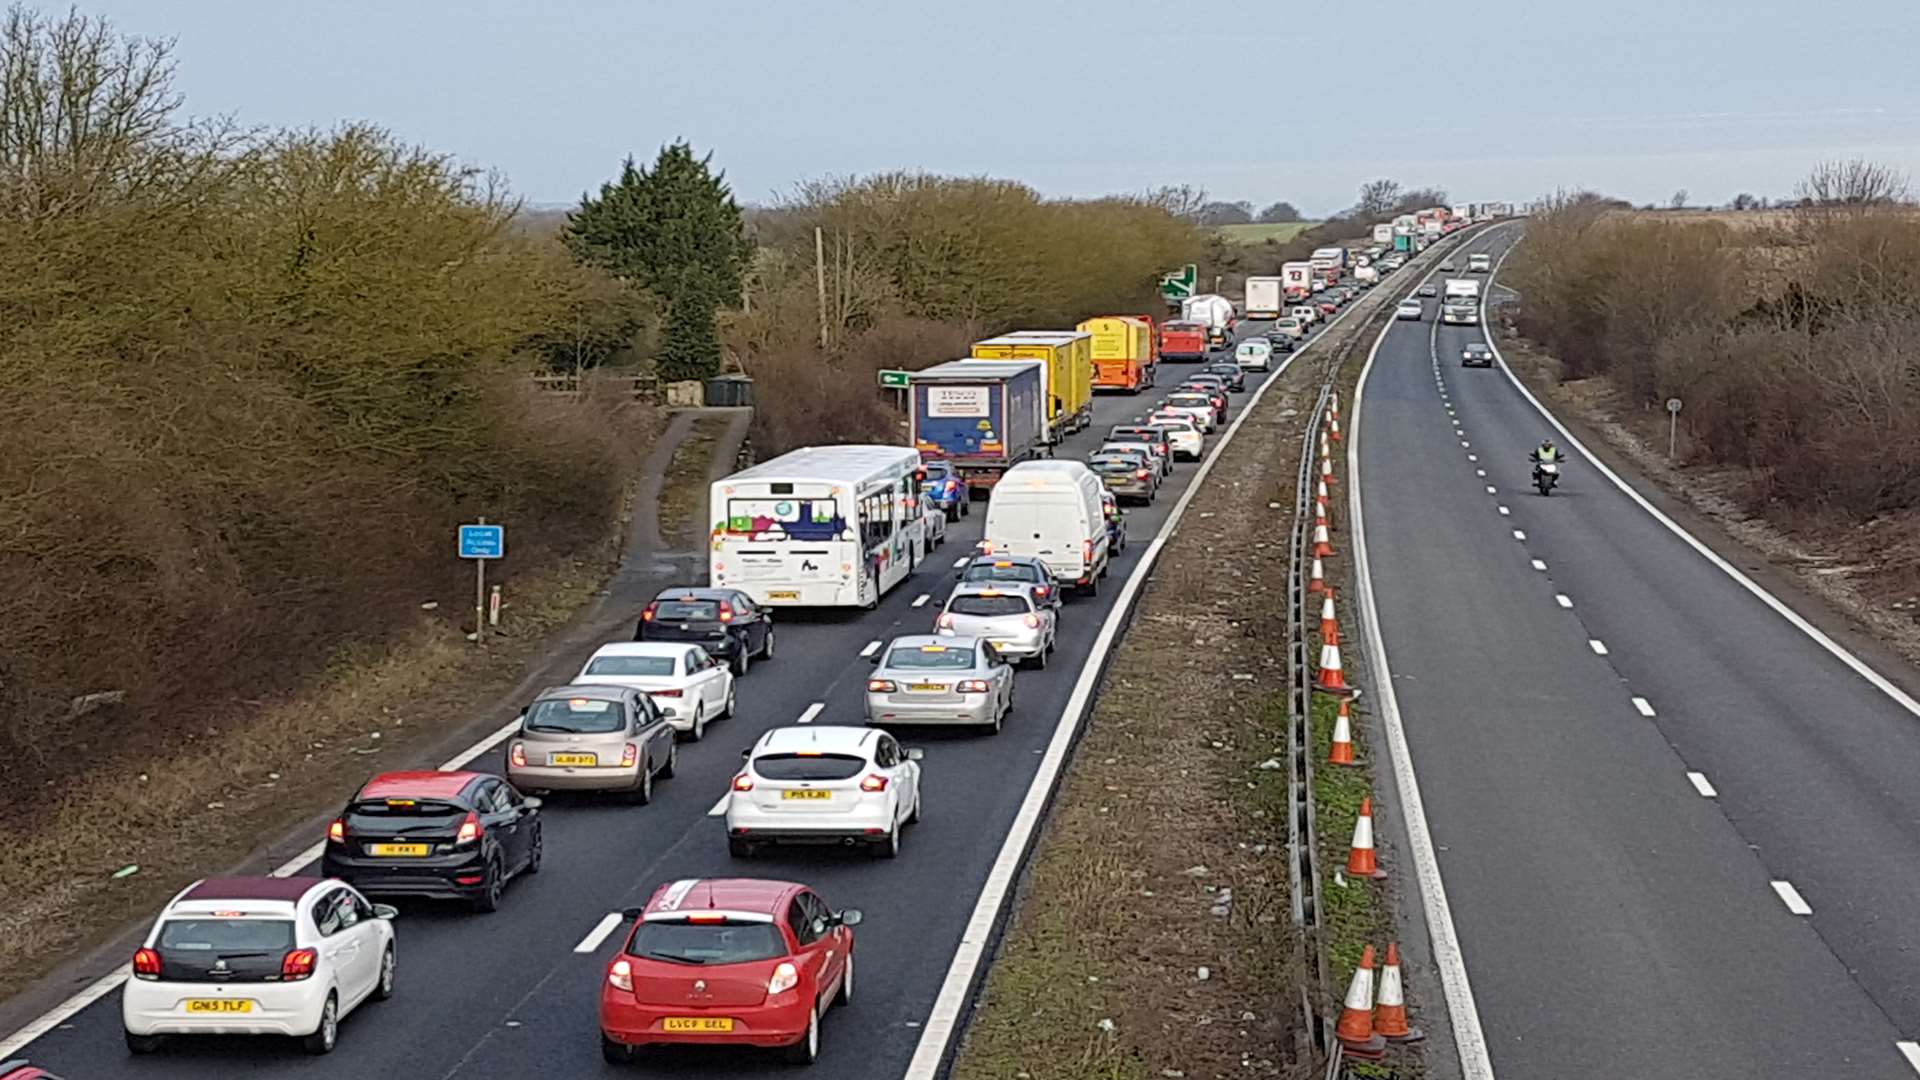 London bound traffic on the A2 near Canterbury is at a standstill due to the crash. Photo: Alan Mountain